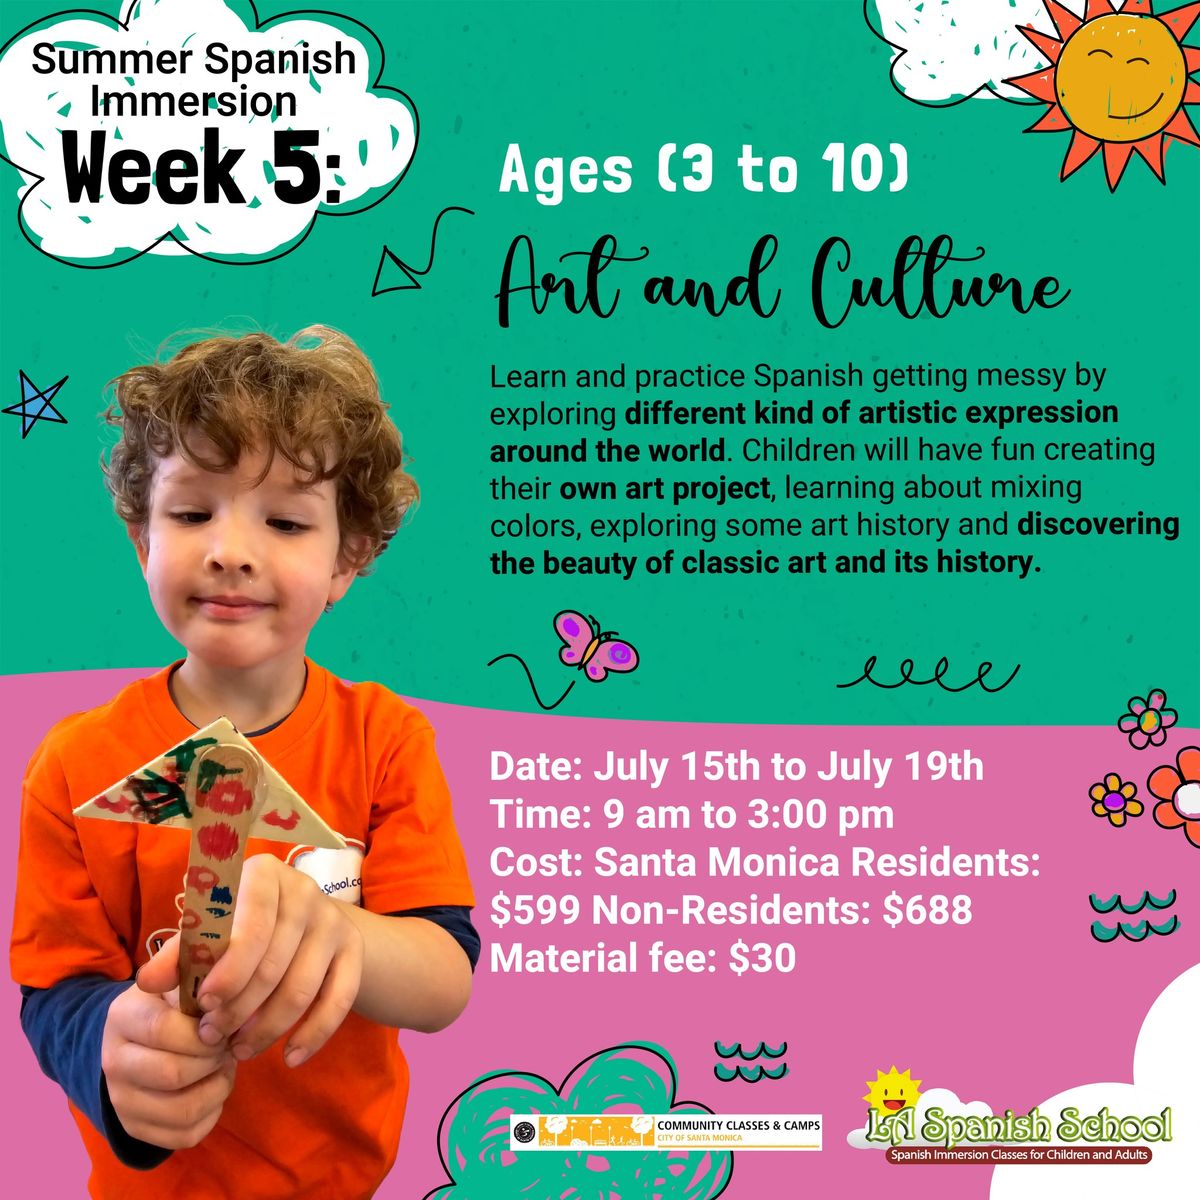 Summer Spanish Immersion Camps (Week 5)